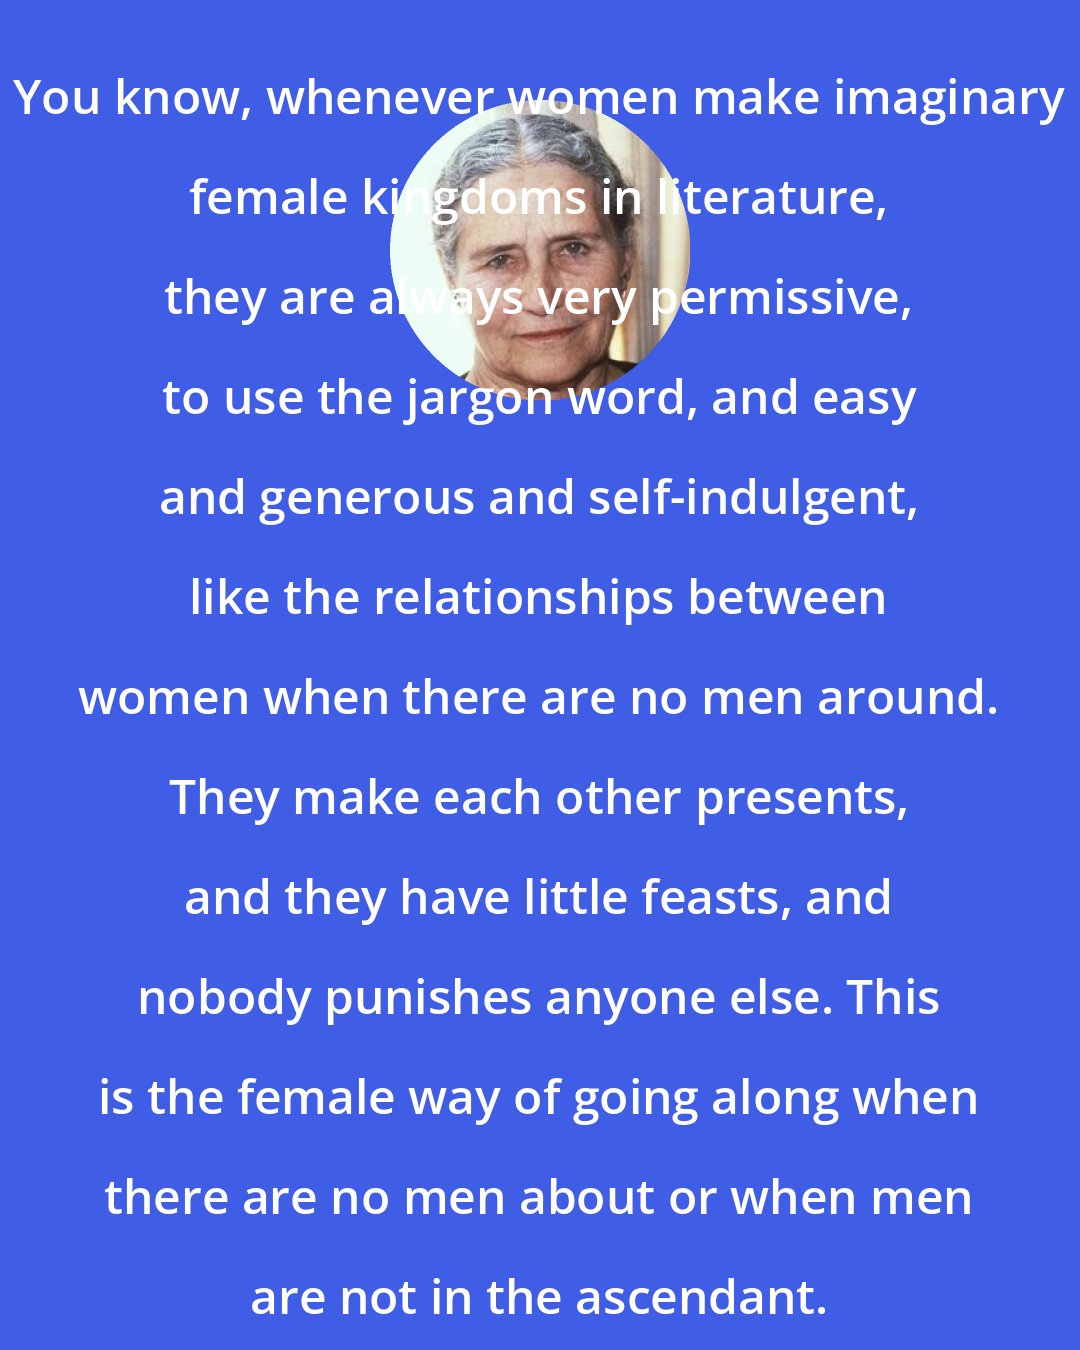 Doris Lessing: You know, whenever women make imaginary female kingdoms in literature, they are always very permissive, to use the jargon word, and easy and generous and self-indulgent, like the relationships between women when there are no men around. They make each other presents, and they have little feasts, and nobody punishes anyone else. This is the female way of going along when there are no men about or when men are not in the ascendant.